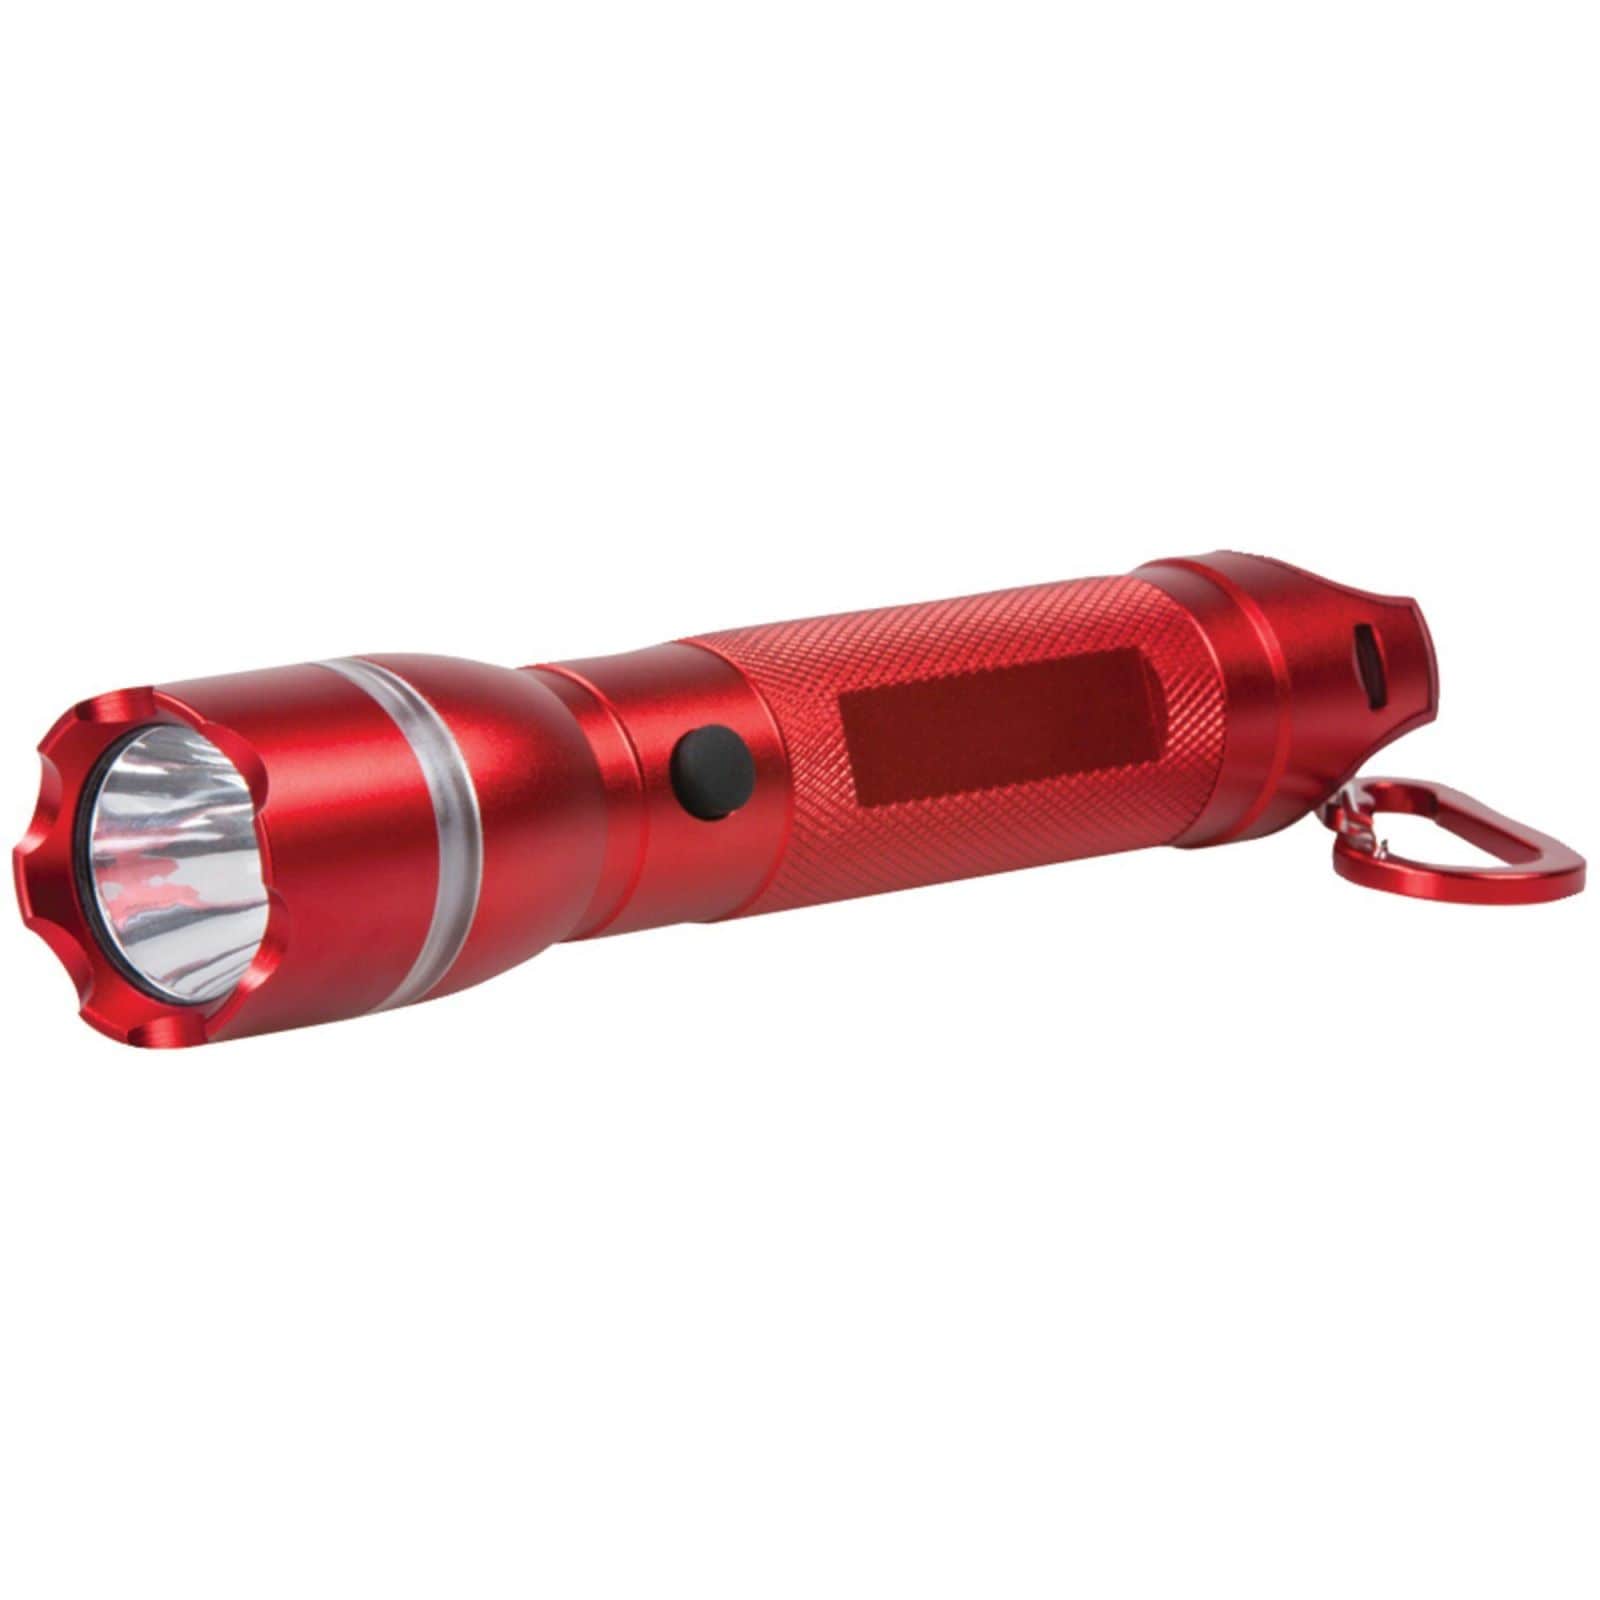 https://ak1.ostkcdn.com/images/products/is/images/direct/33f20a2580098383c2a2c769785cb182d3abe26c/250-Lumen-Searchlight-with-Emergency-Beacon.jpg